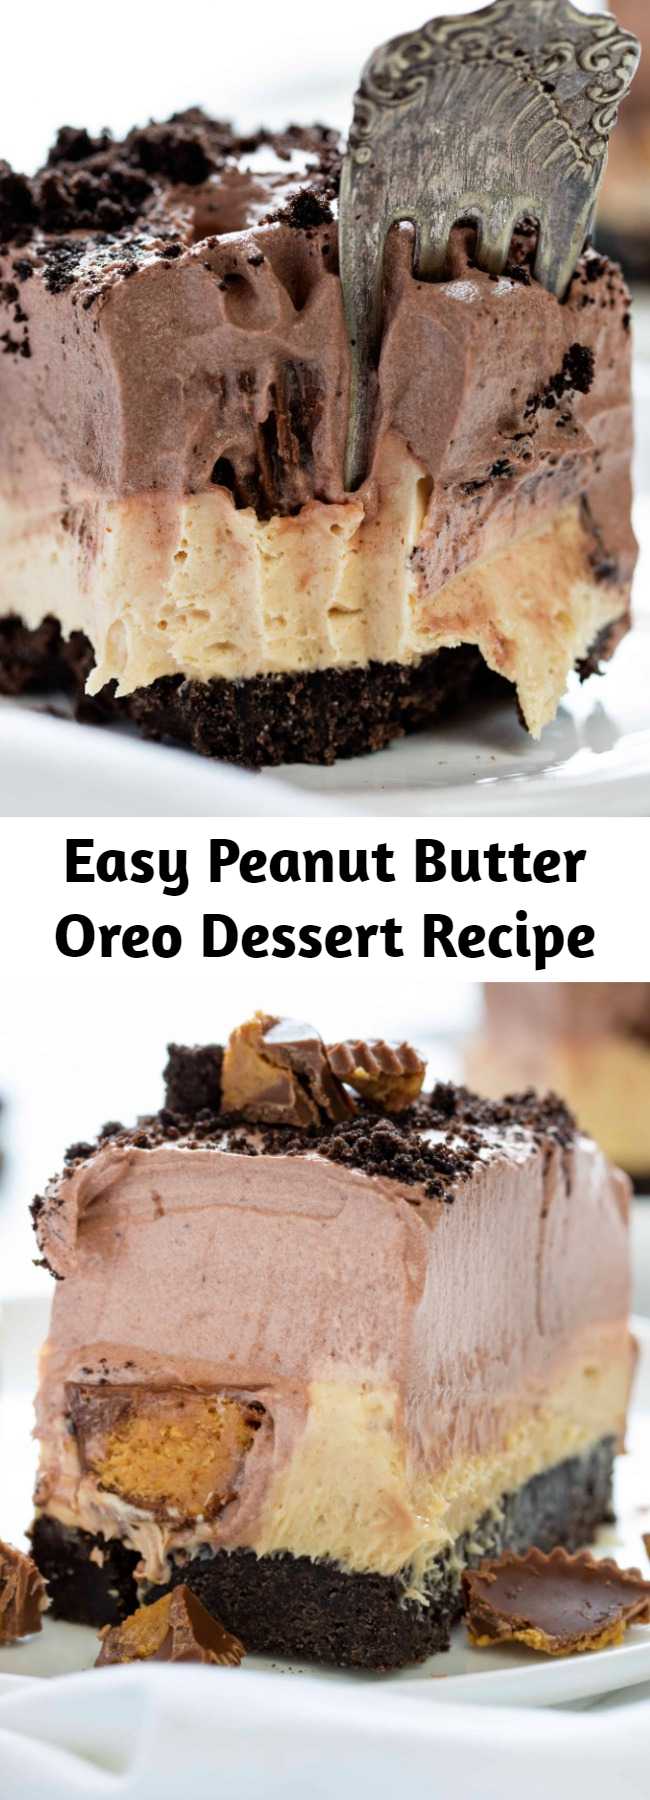 Easy Peanut Butter Oreo Dessert Recipe - When it comes to peanut butter desserts, this Peanut Butter Oreo Dessert will top them all.  This delectable treat has layers of velvety peanut butter filling, peanut butter filled chocolate candy, and a rich hot fudge mousse piled on top of an Oreo cookie crust. To top it all off, there is no baking involved!